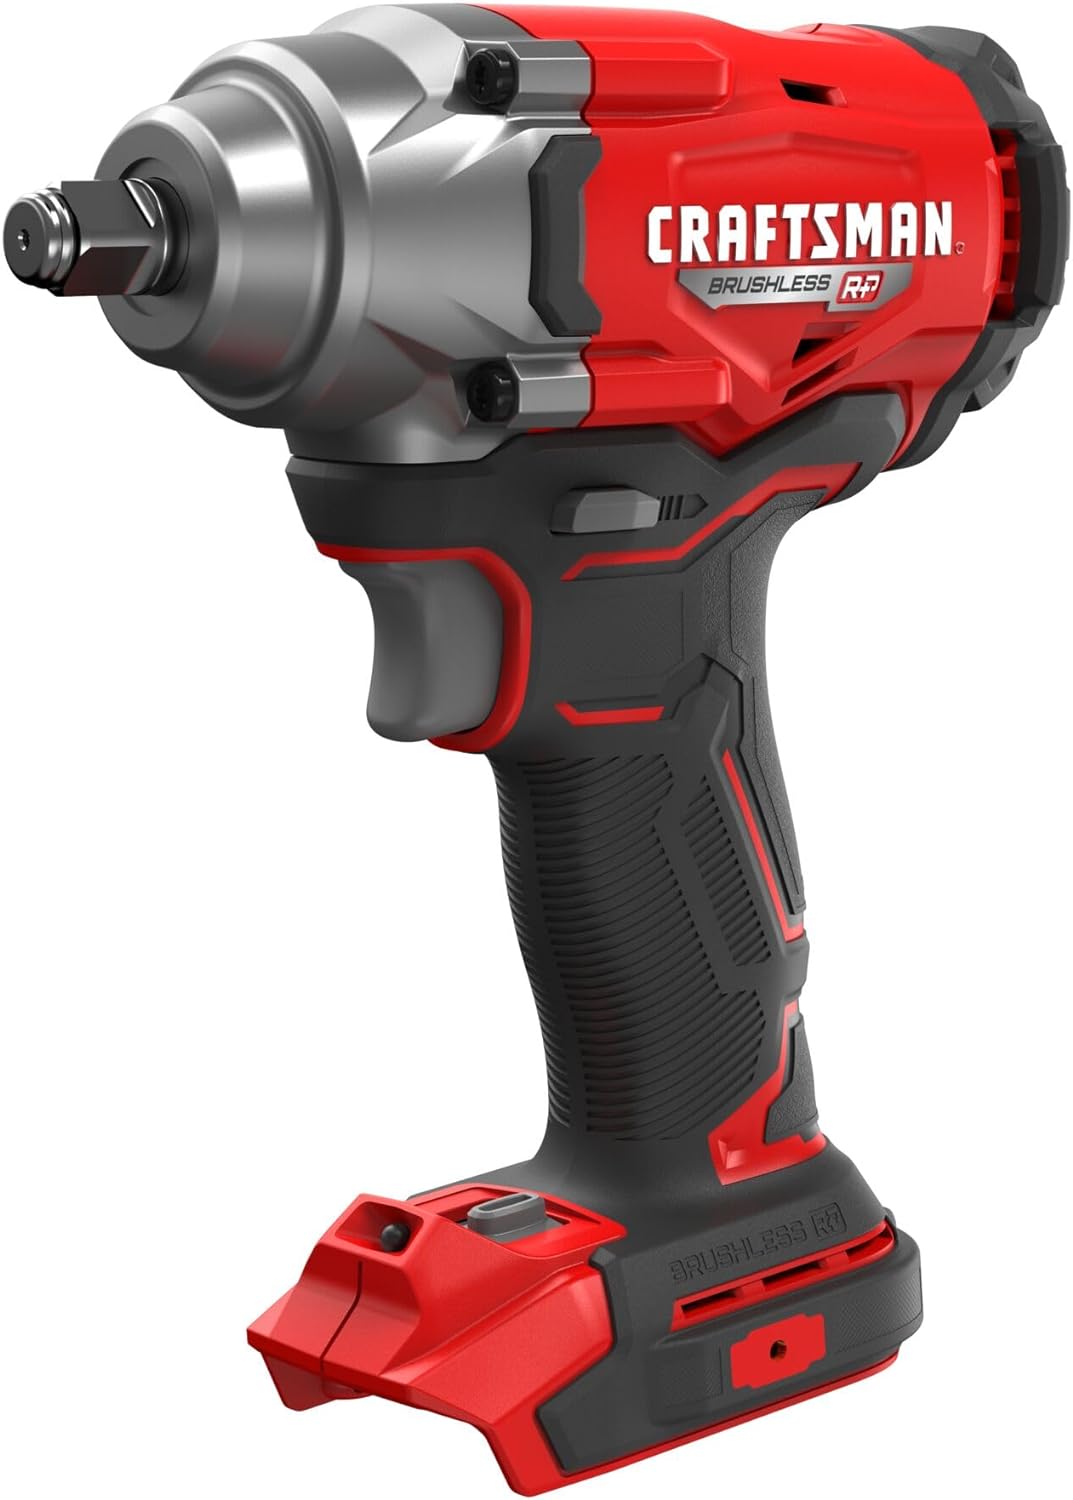 Craftsman V20 Cordless Impact Driver, 1/2 Inch, Bare Tool Only (Cmcf921B)